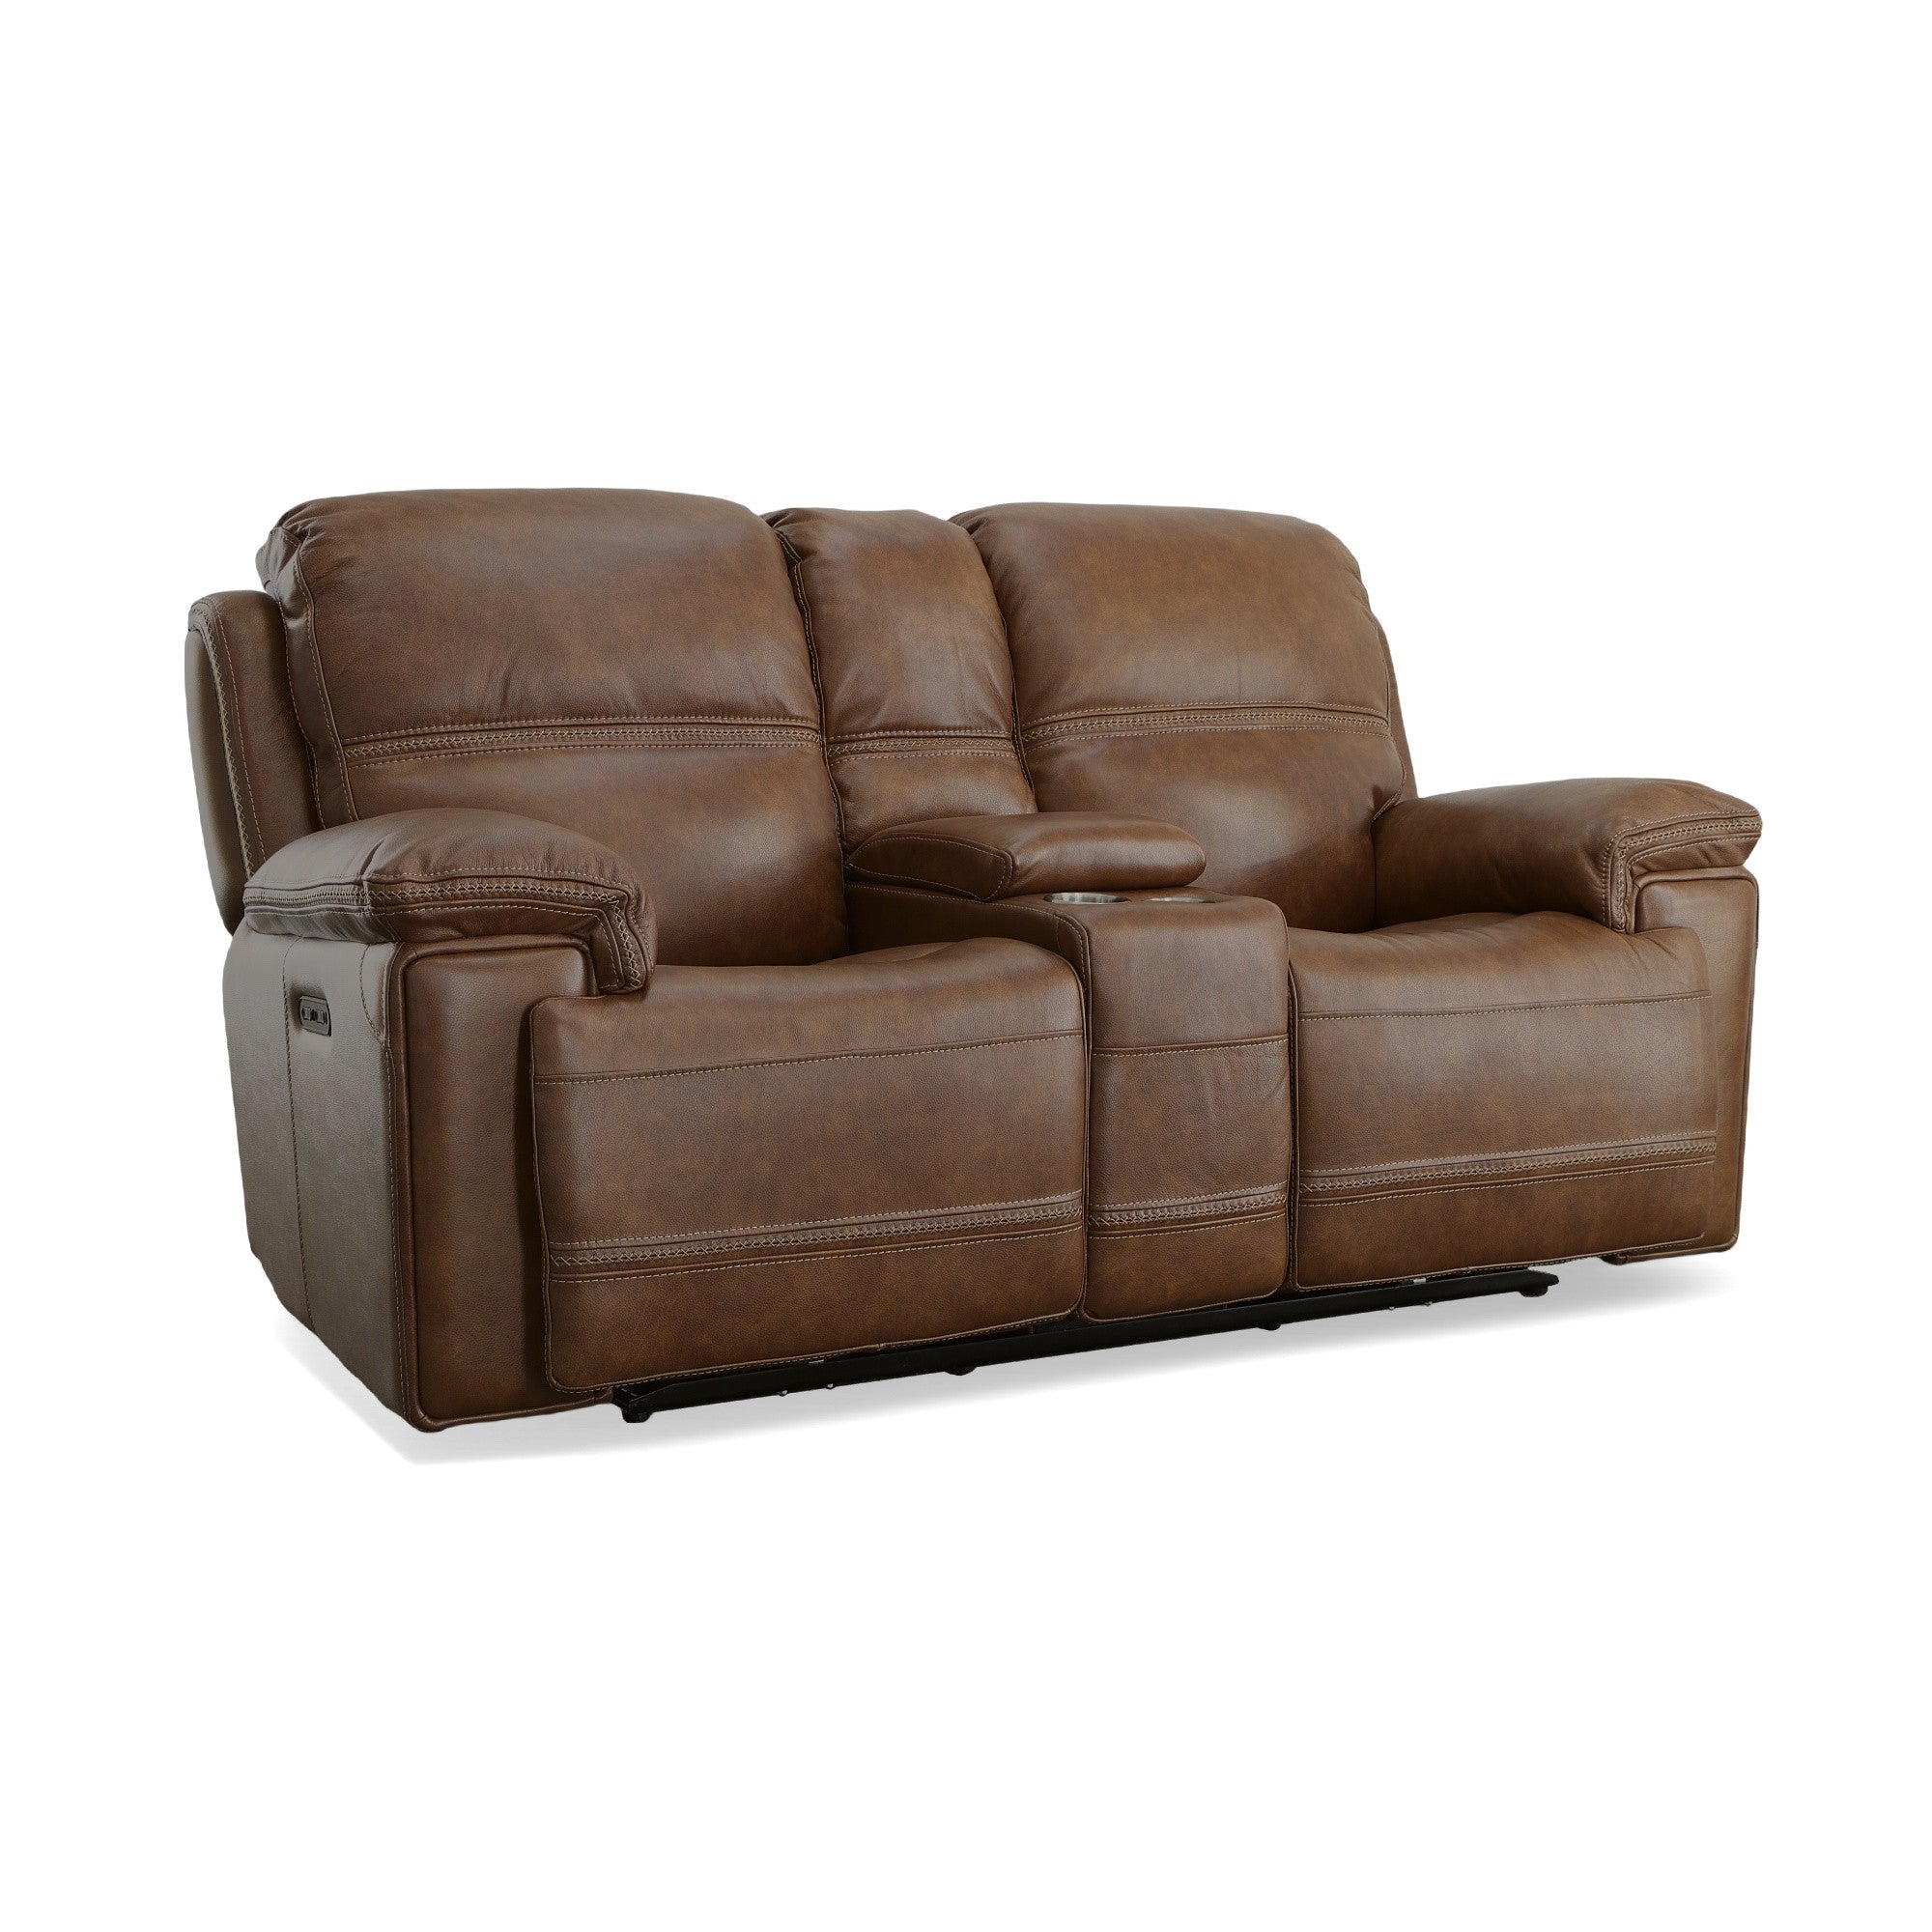 Fenwick Power Reclining Loveseat with Console and Power Headrests - Baconco